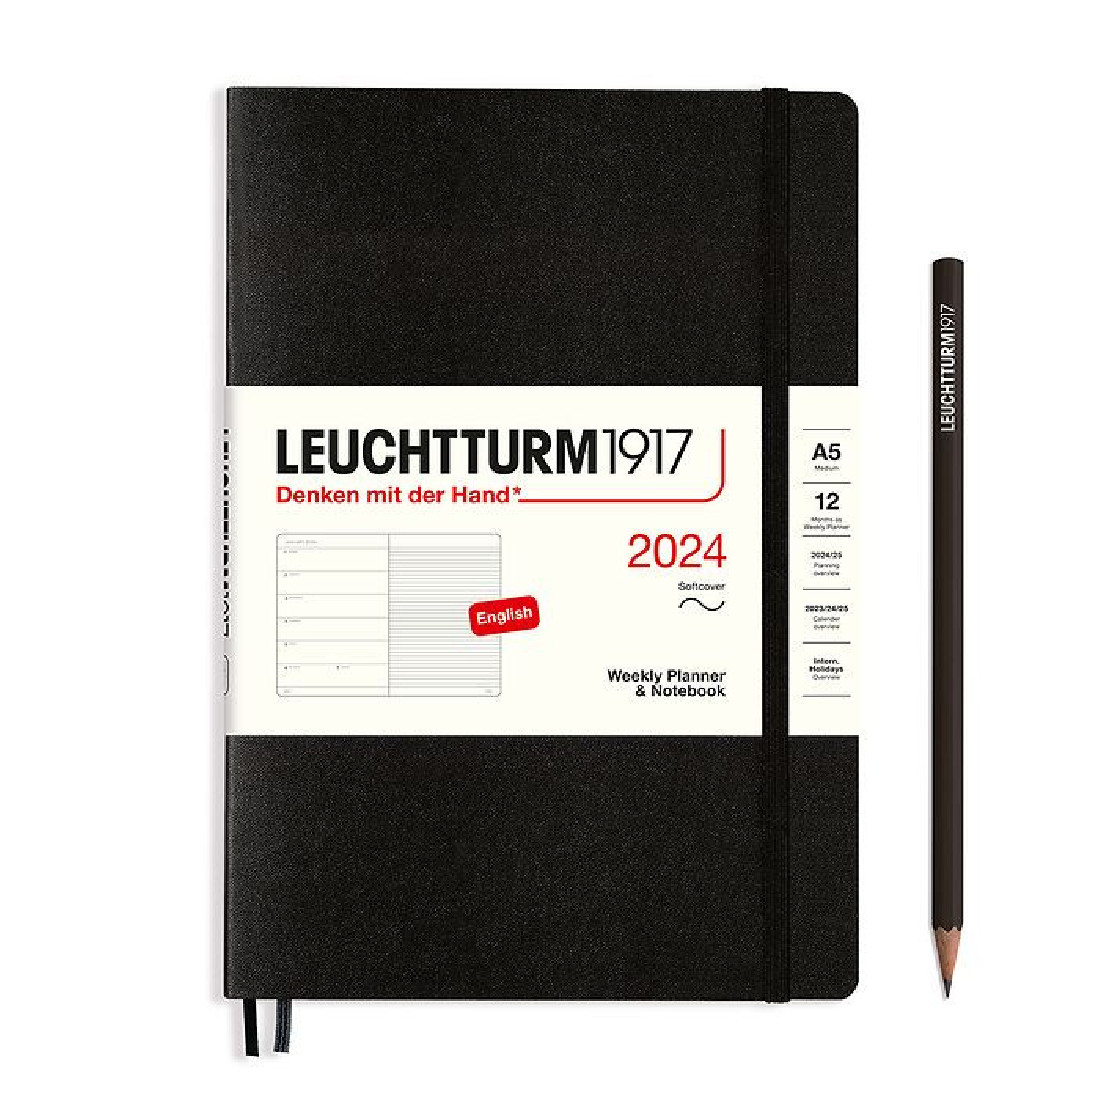 Leuchtturm 1917 Weekly Planner and Notebook 2024 Black Medium A5 Soft Cover